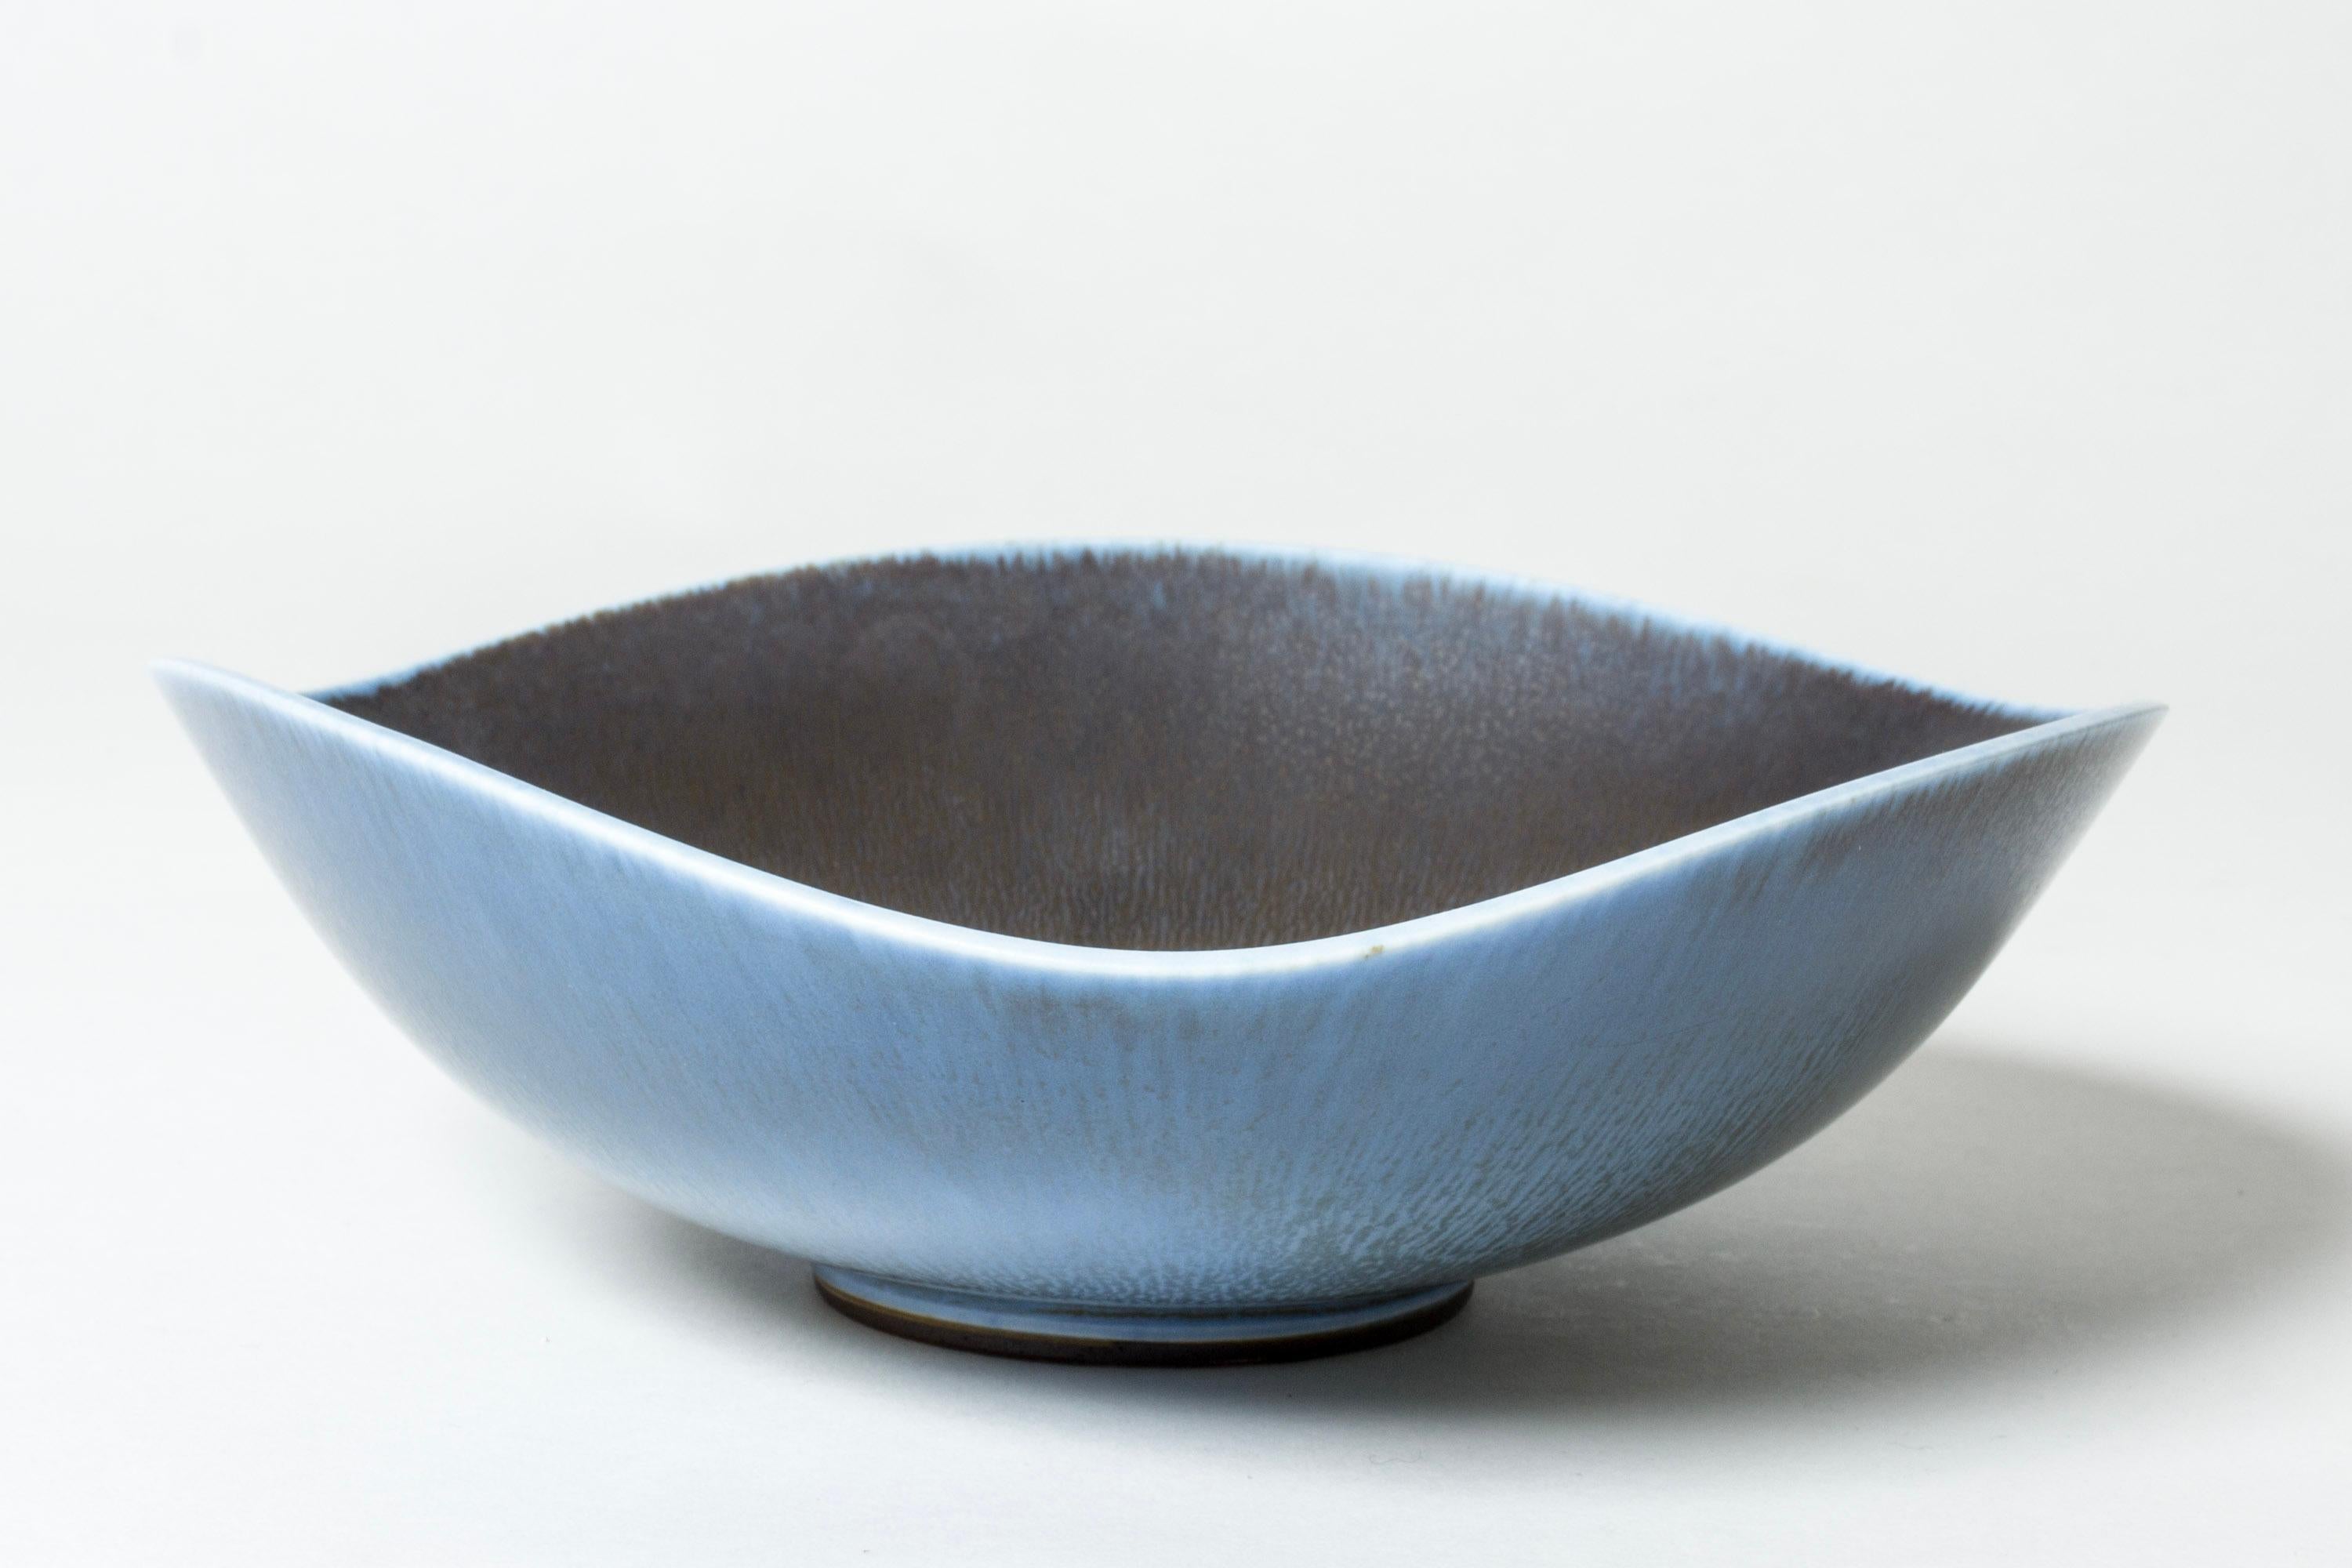 Large stoneware bowl by Berndt Friberg, with an undulating edge and rounded triangular form. Striking blue hare’s fur glaze, darker on the inside and lighter on the outside.

Berndt Friberg was a Swedish ceramicist, renowned for his stoneware